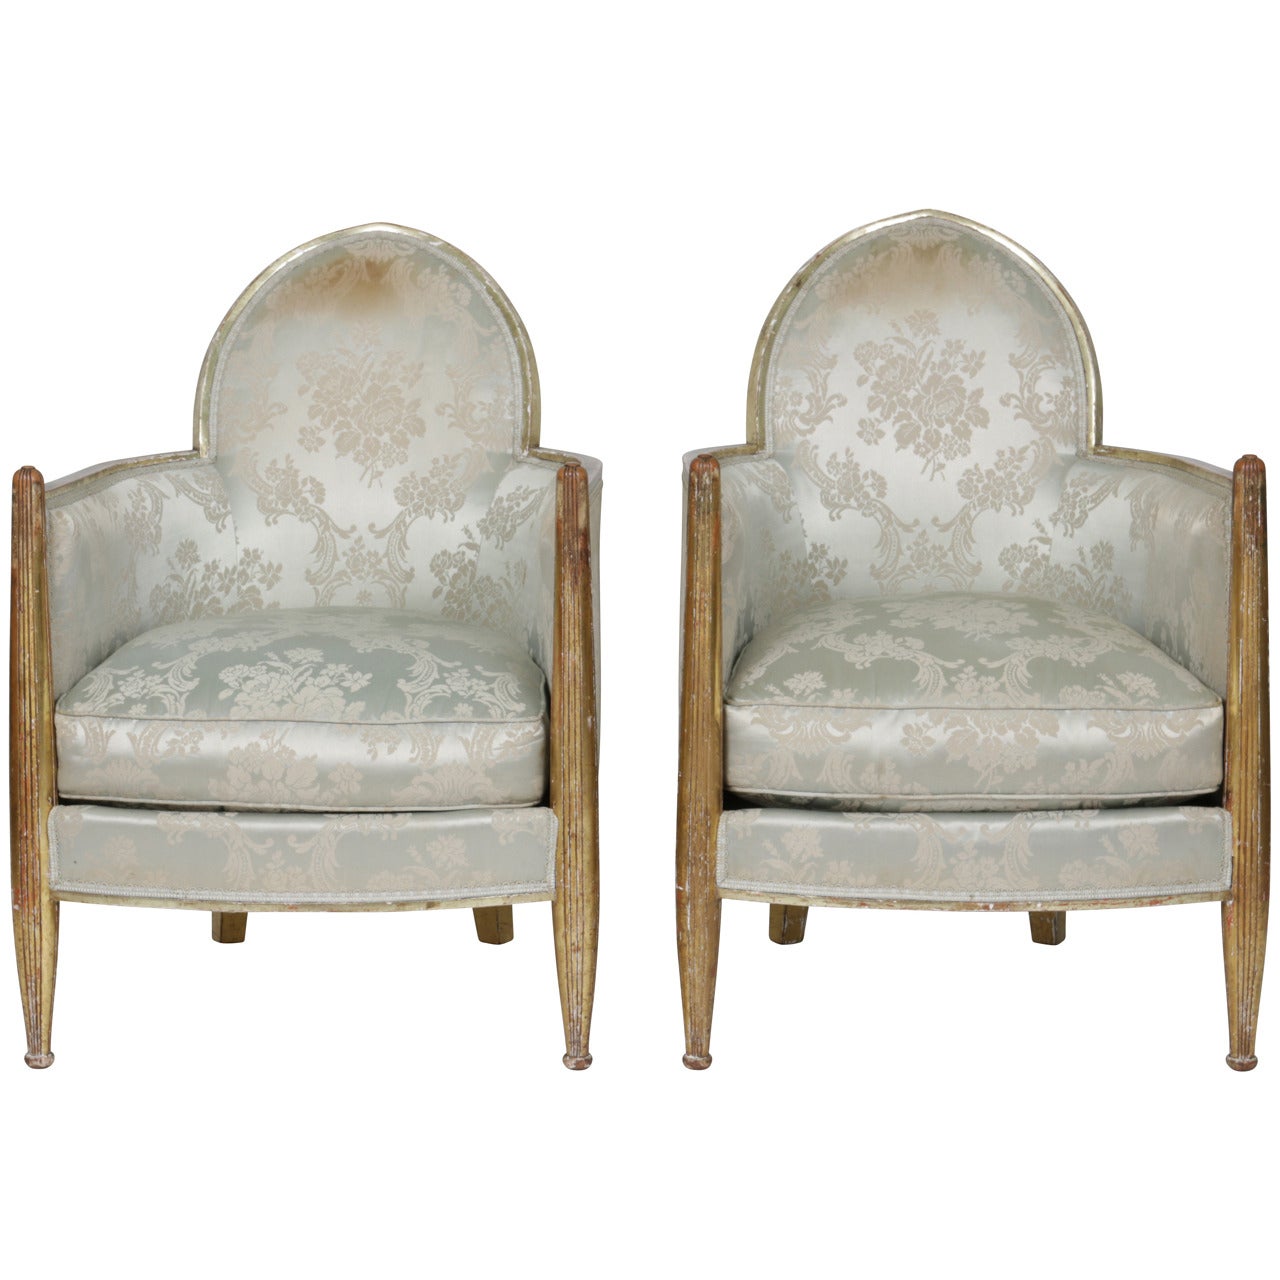 Original Matched Pair French Art Deco Club Chairs by Paul Follot, France, 1930s For Sale